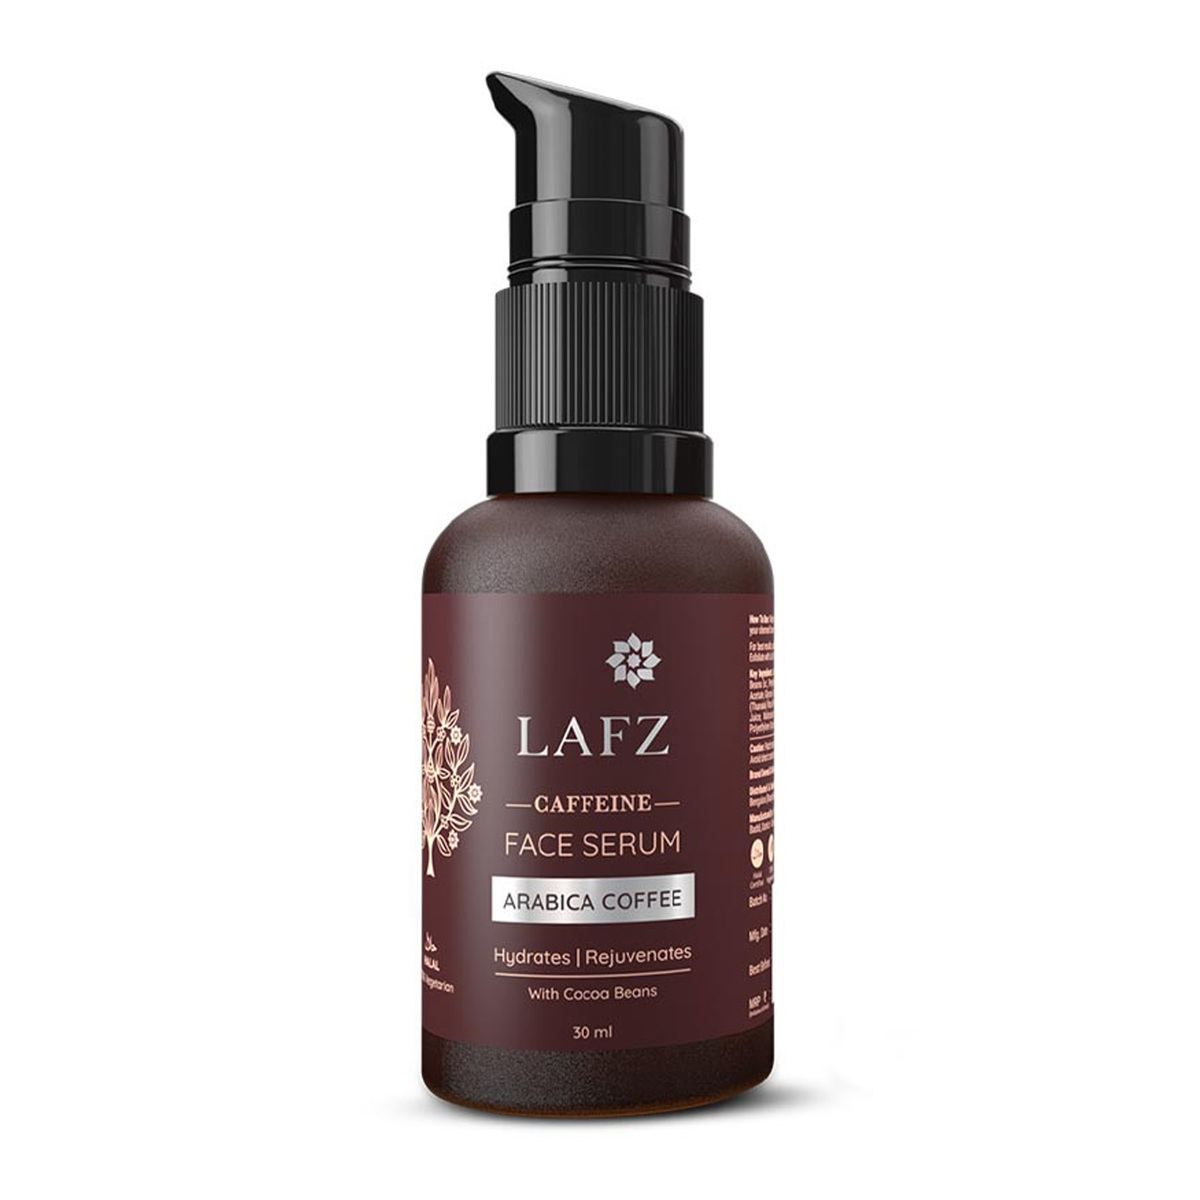 Lafz Coffee Face Serum, Enriched with Arabica Coffee and Cocoa Beans, Exfoliates, Brightens Skin, Halal & Vegan, For All Skin Types, 30 ml